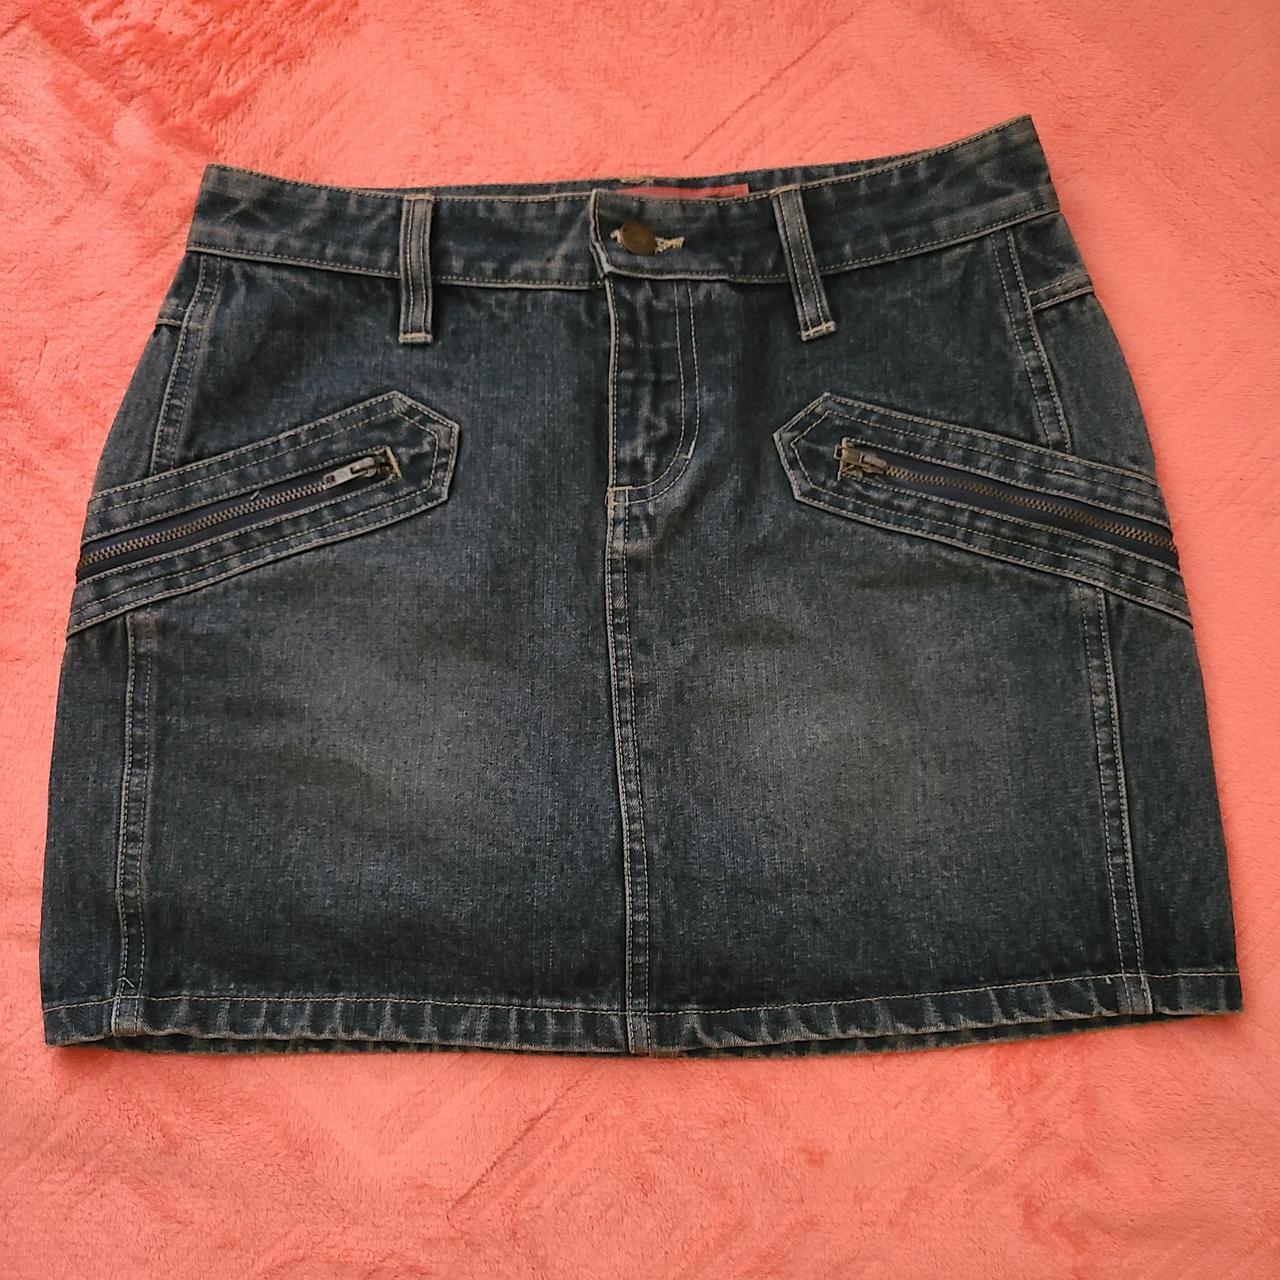 Y2K Denim mini skirt by Mossissue. From early 2000's... - Depop